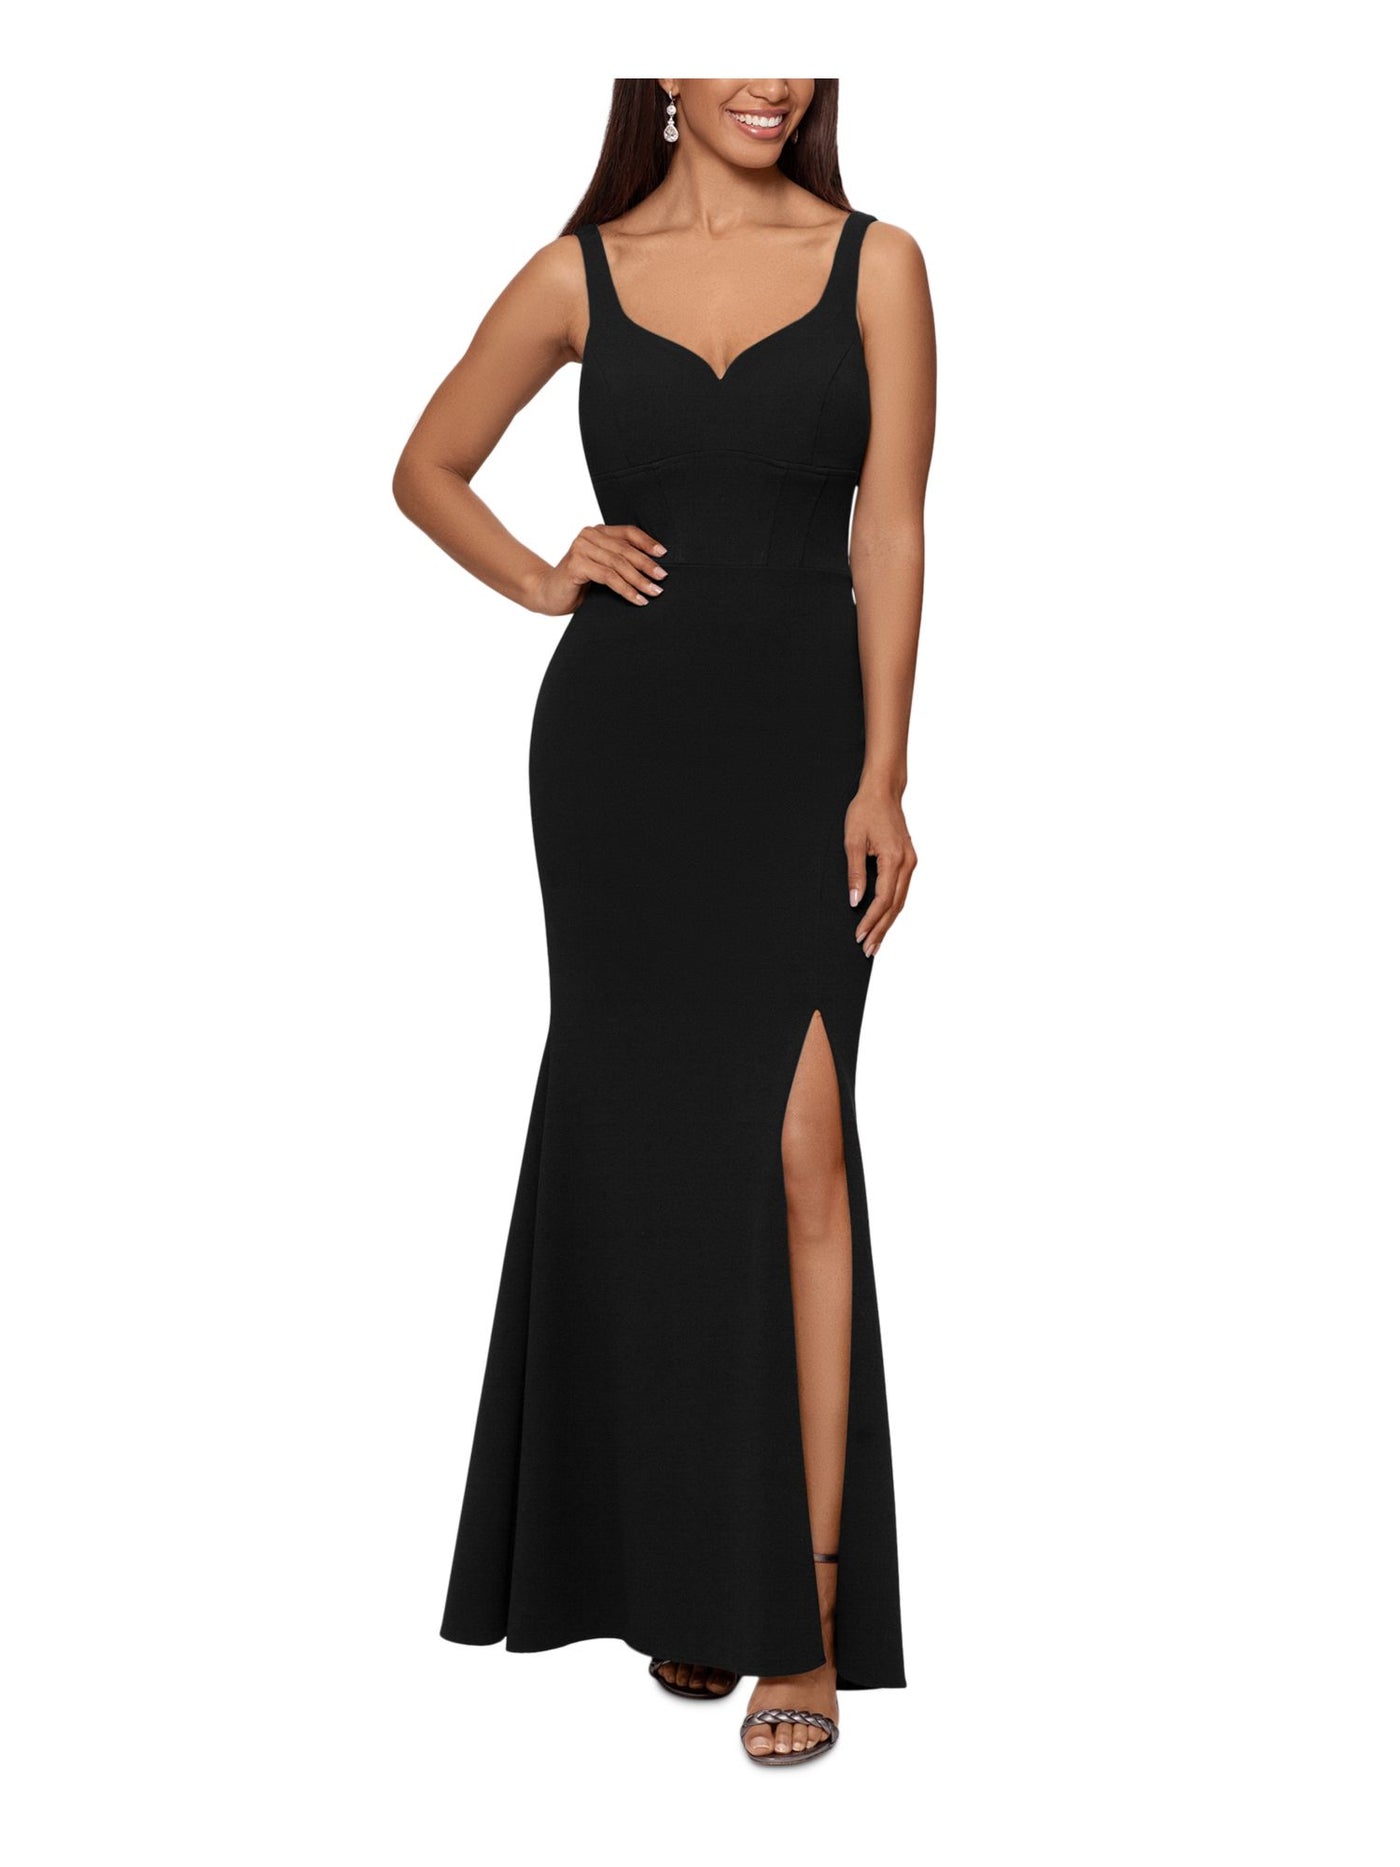 XSCAPE Womens Black Stretch Zippered Slitted Lined Adjustable Straps Sleeveless Sweetheart Neckline Full-Length Formal Gown Dress 12